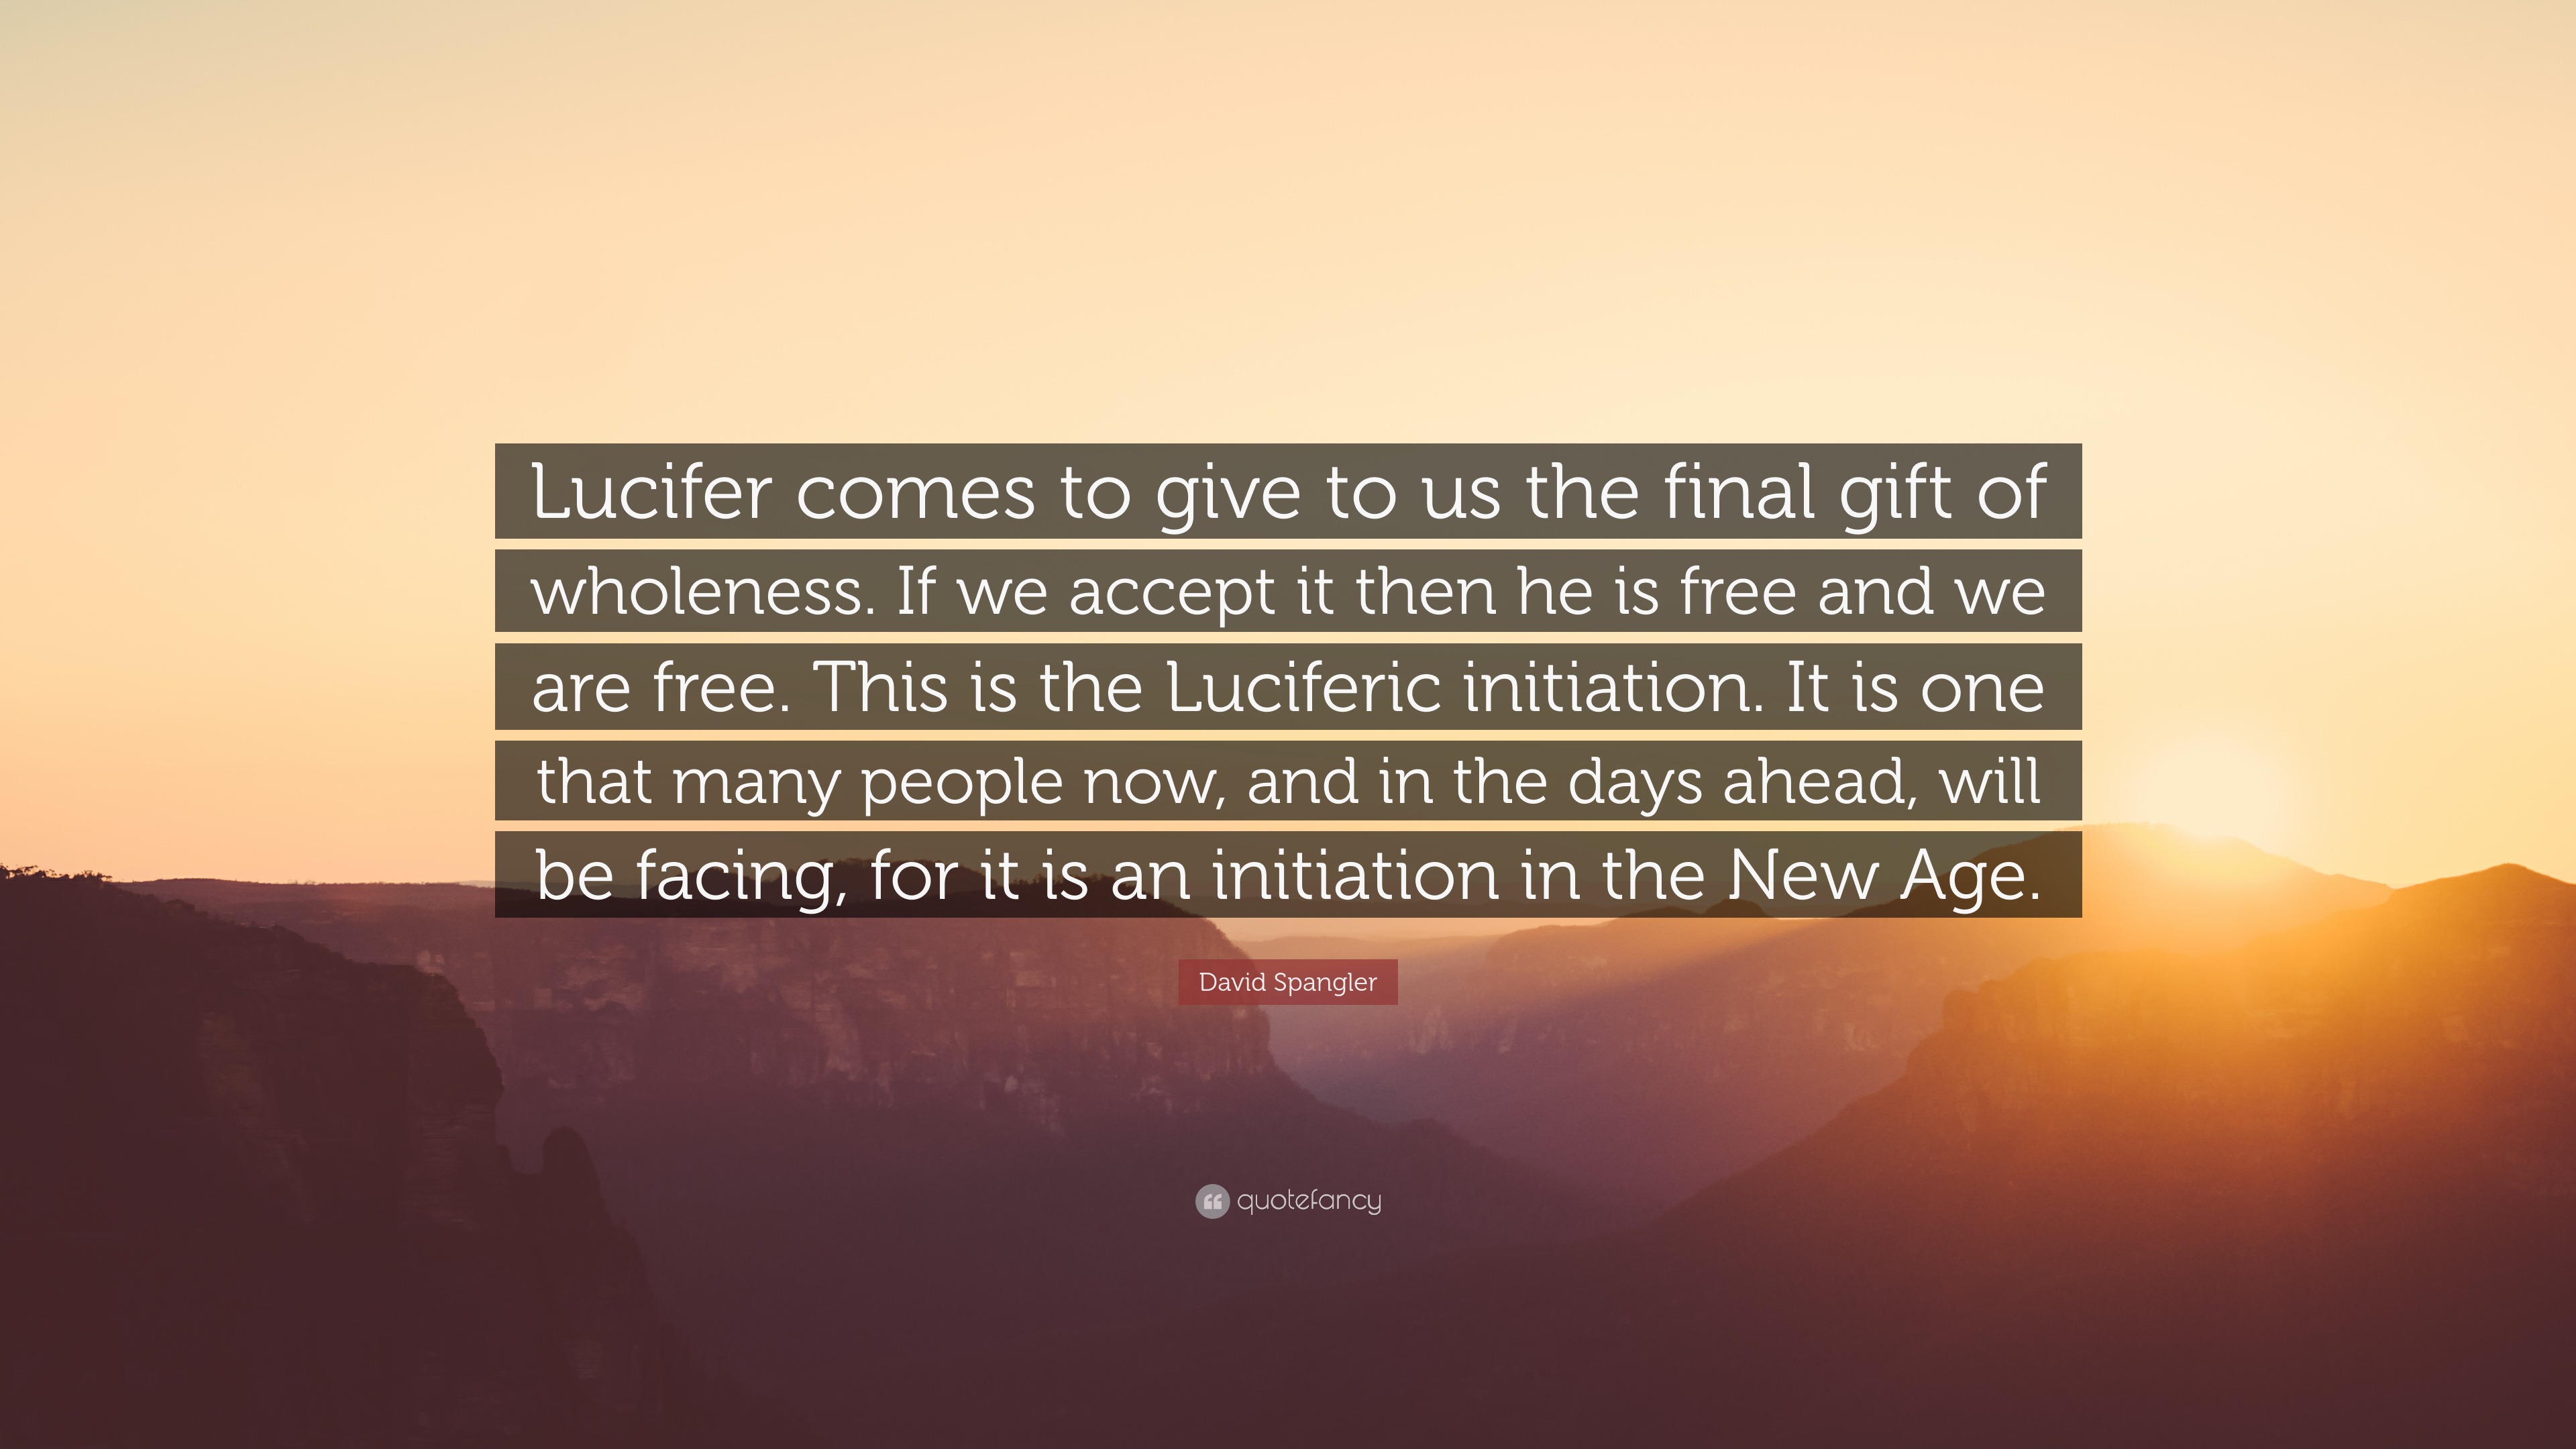 David Spangler Quote: “Lucifer comes to give to us the final gift of  wholeness. If we accept it then he is free and we are free. This is the  Lu...”